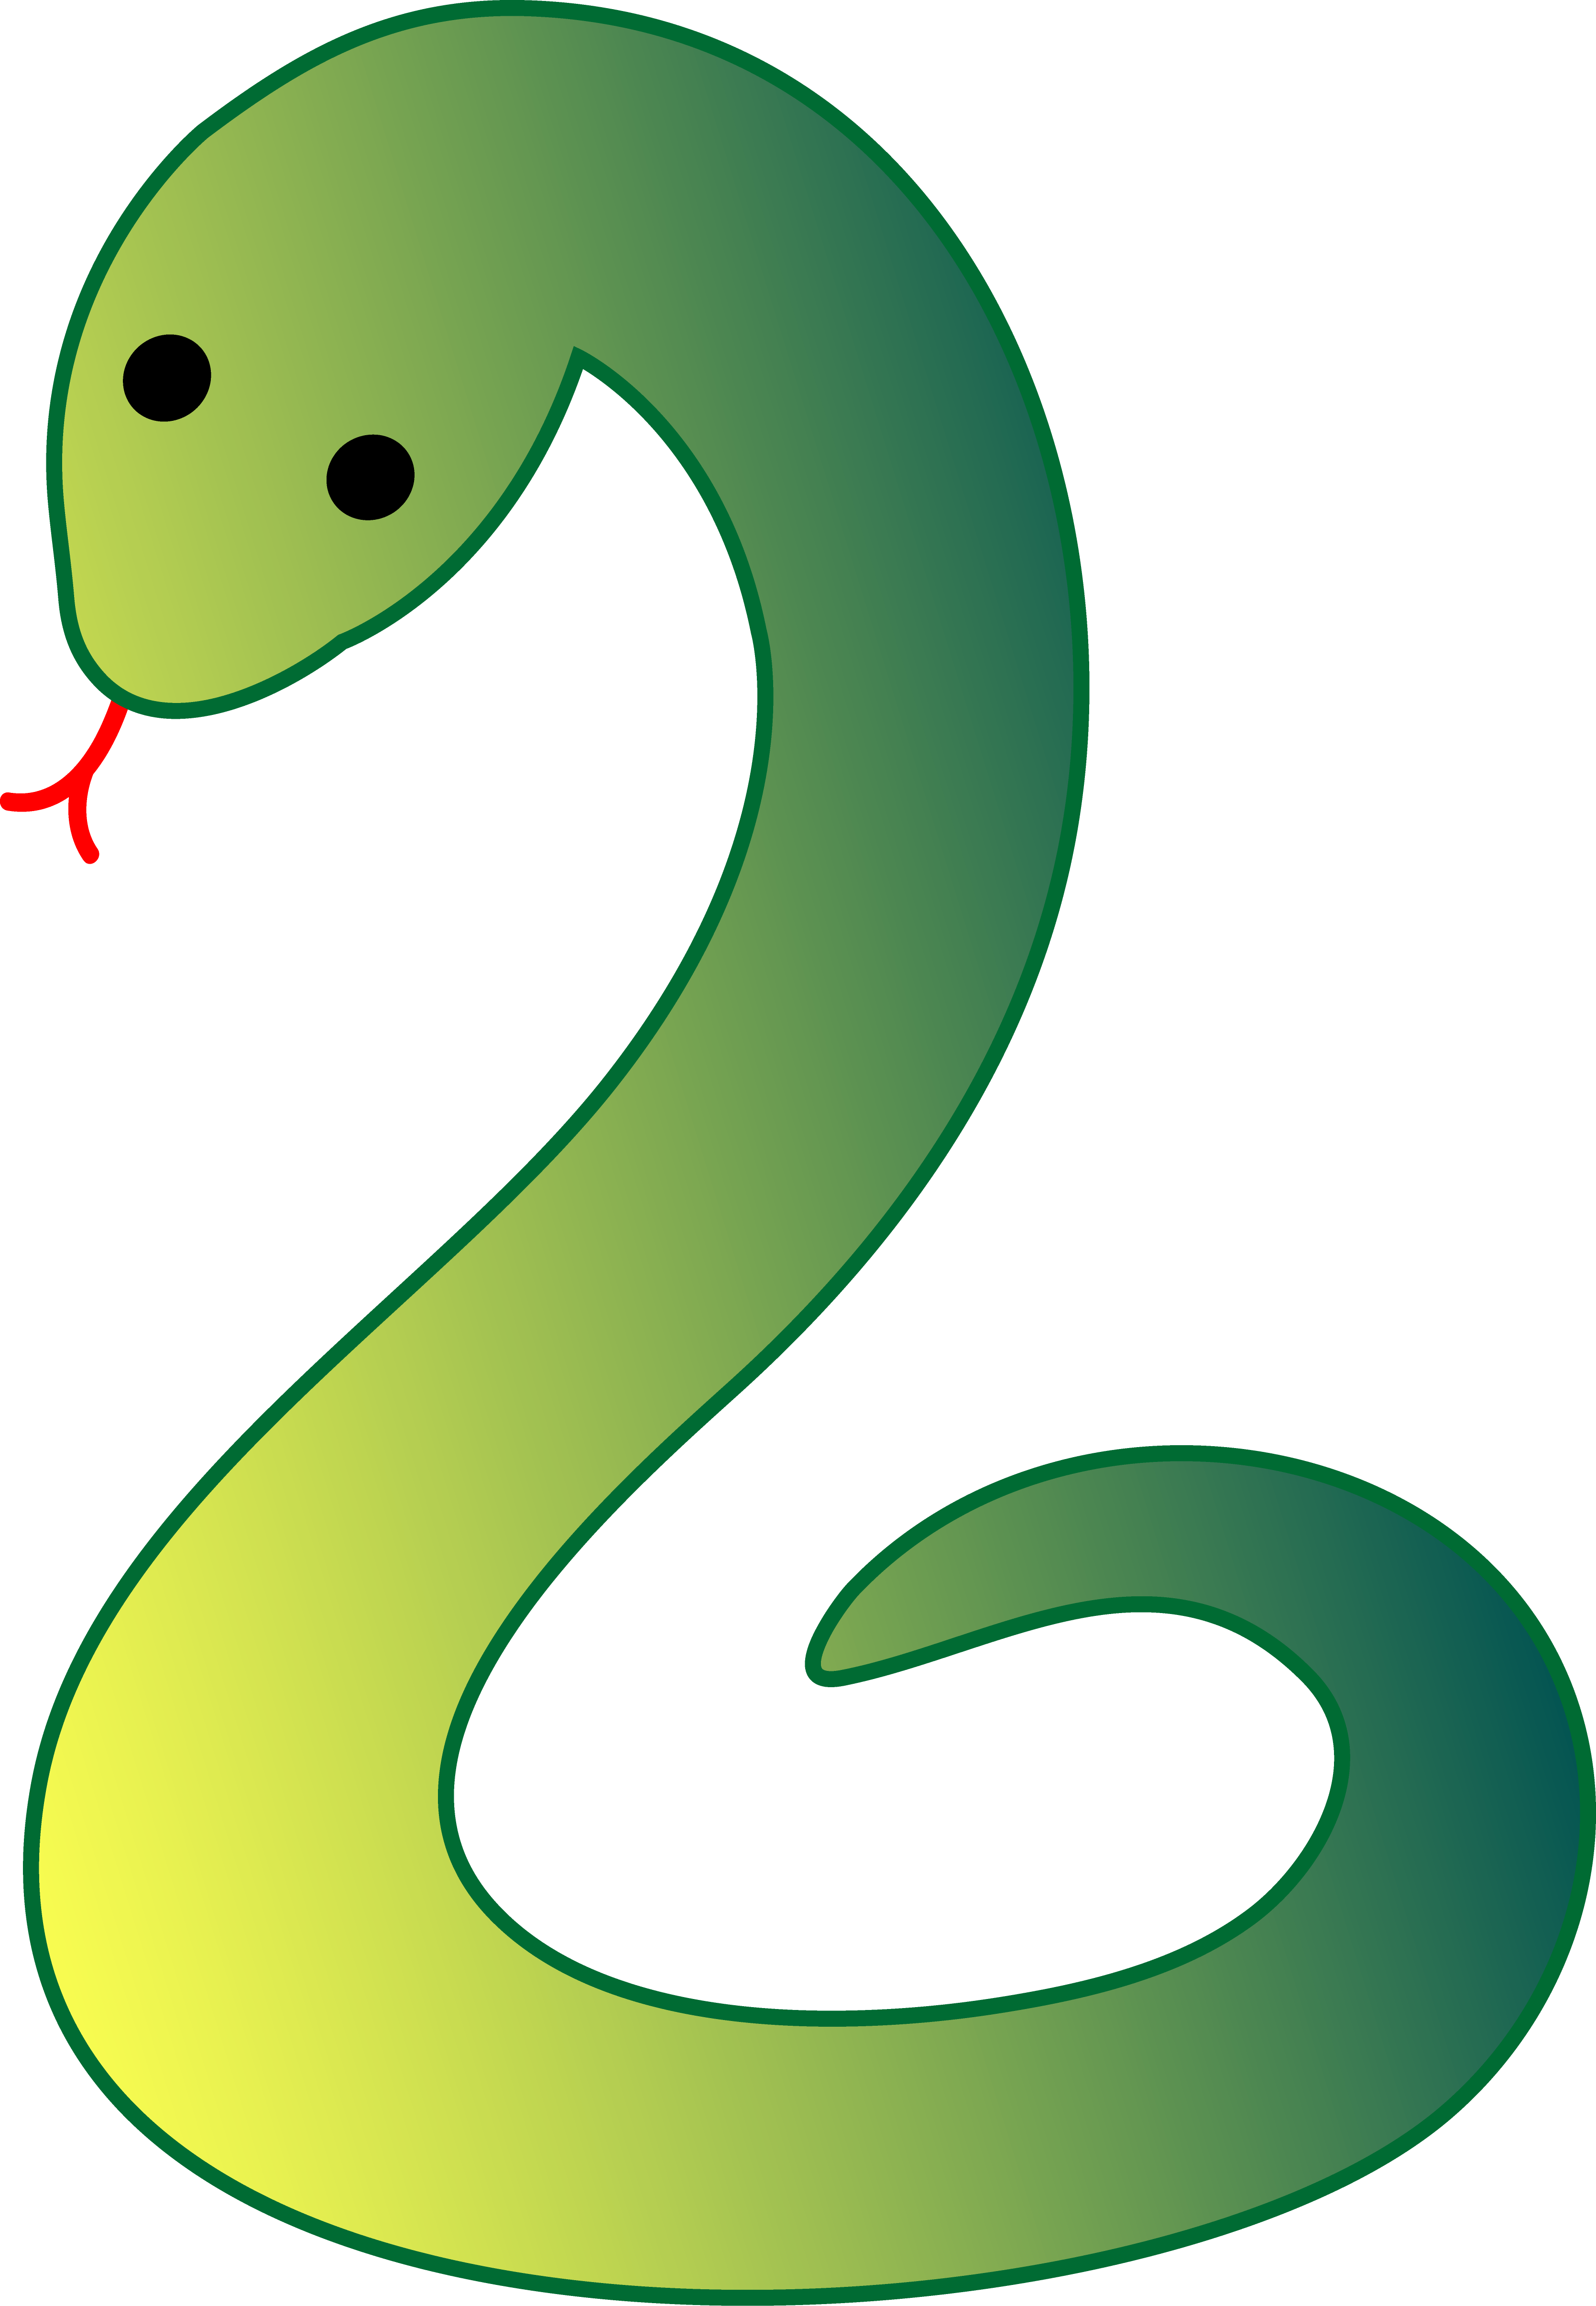 Cute Snake Clipart | Clipart Panda - Free Clipart Images